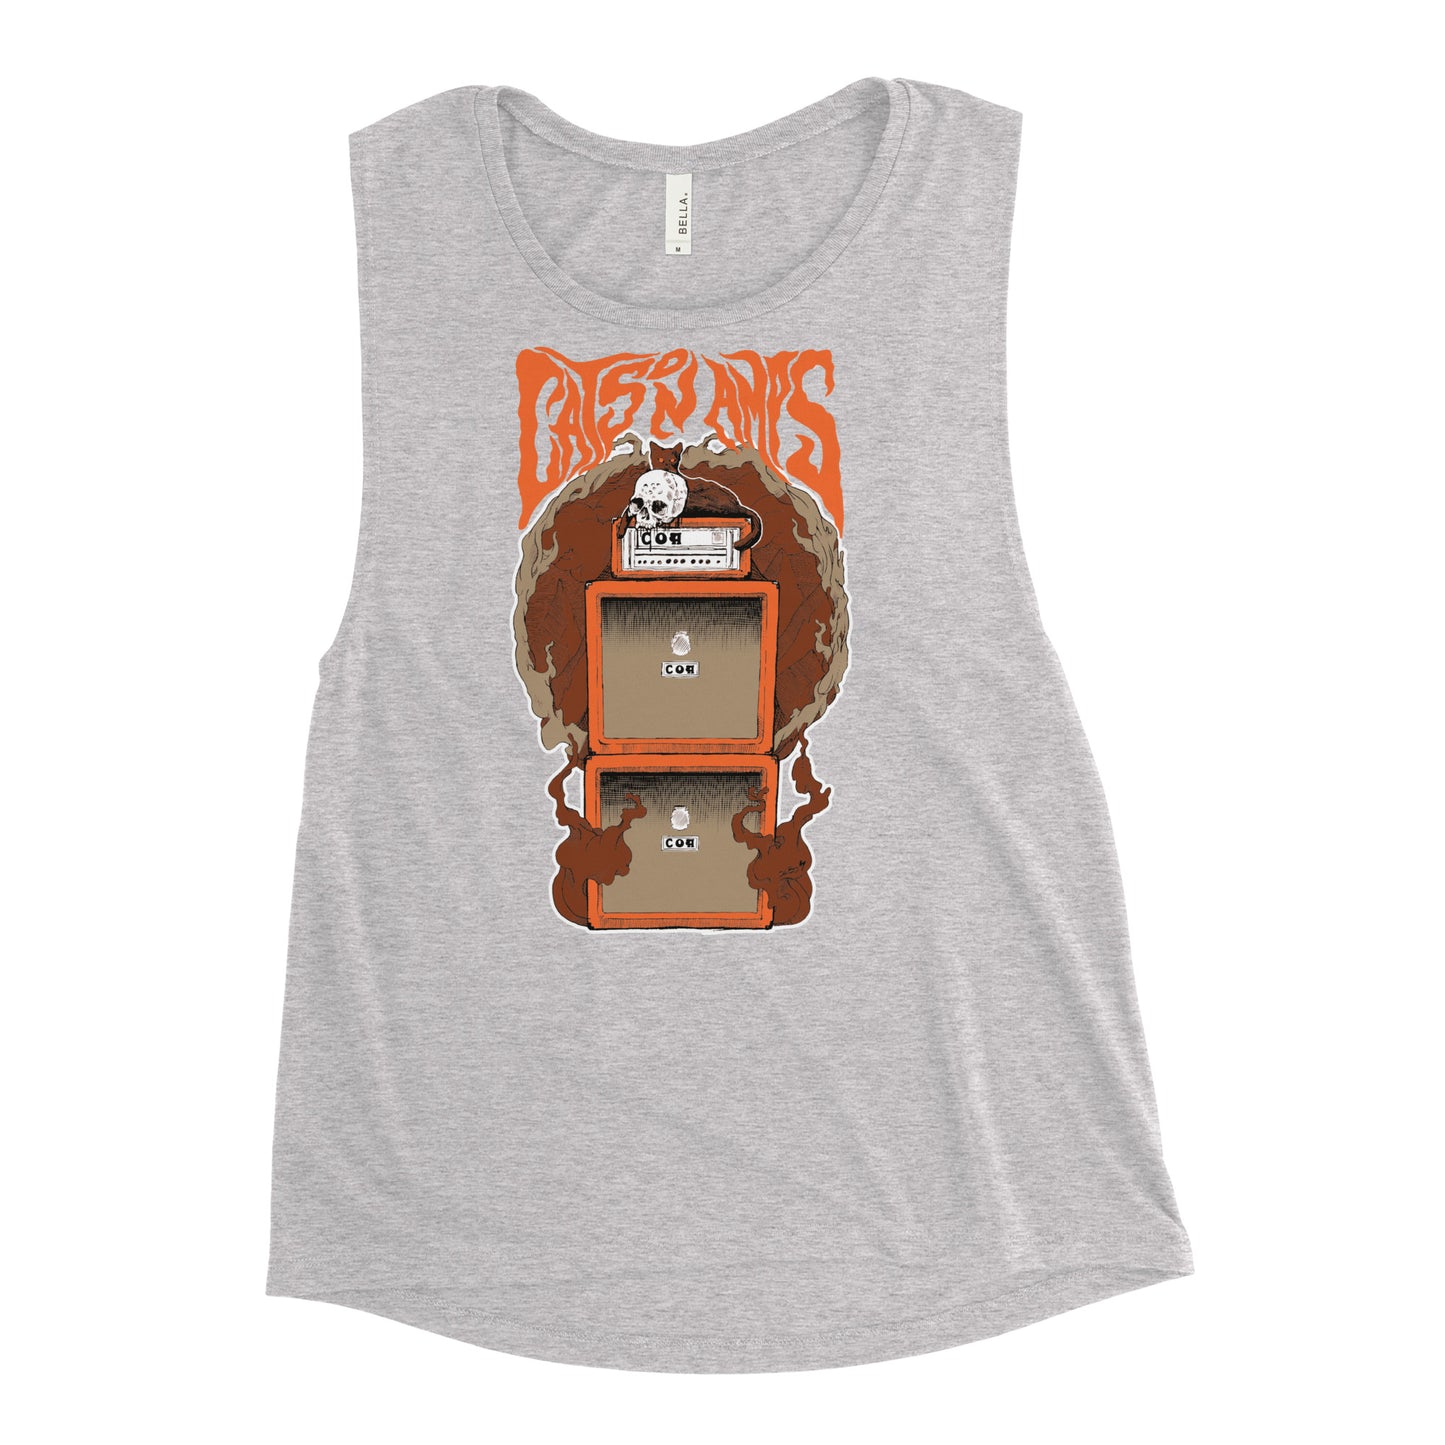 CATS ON AMPS - OJ - Ladies’ Muscle Tank